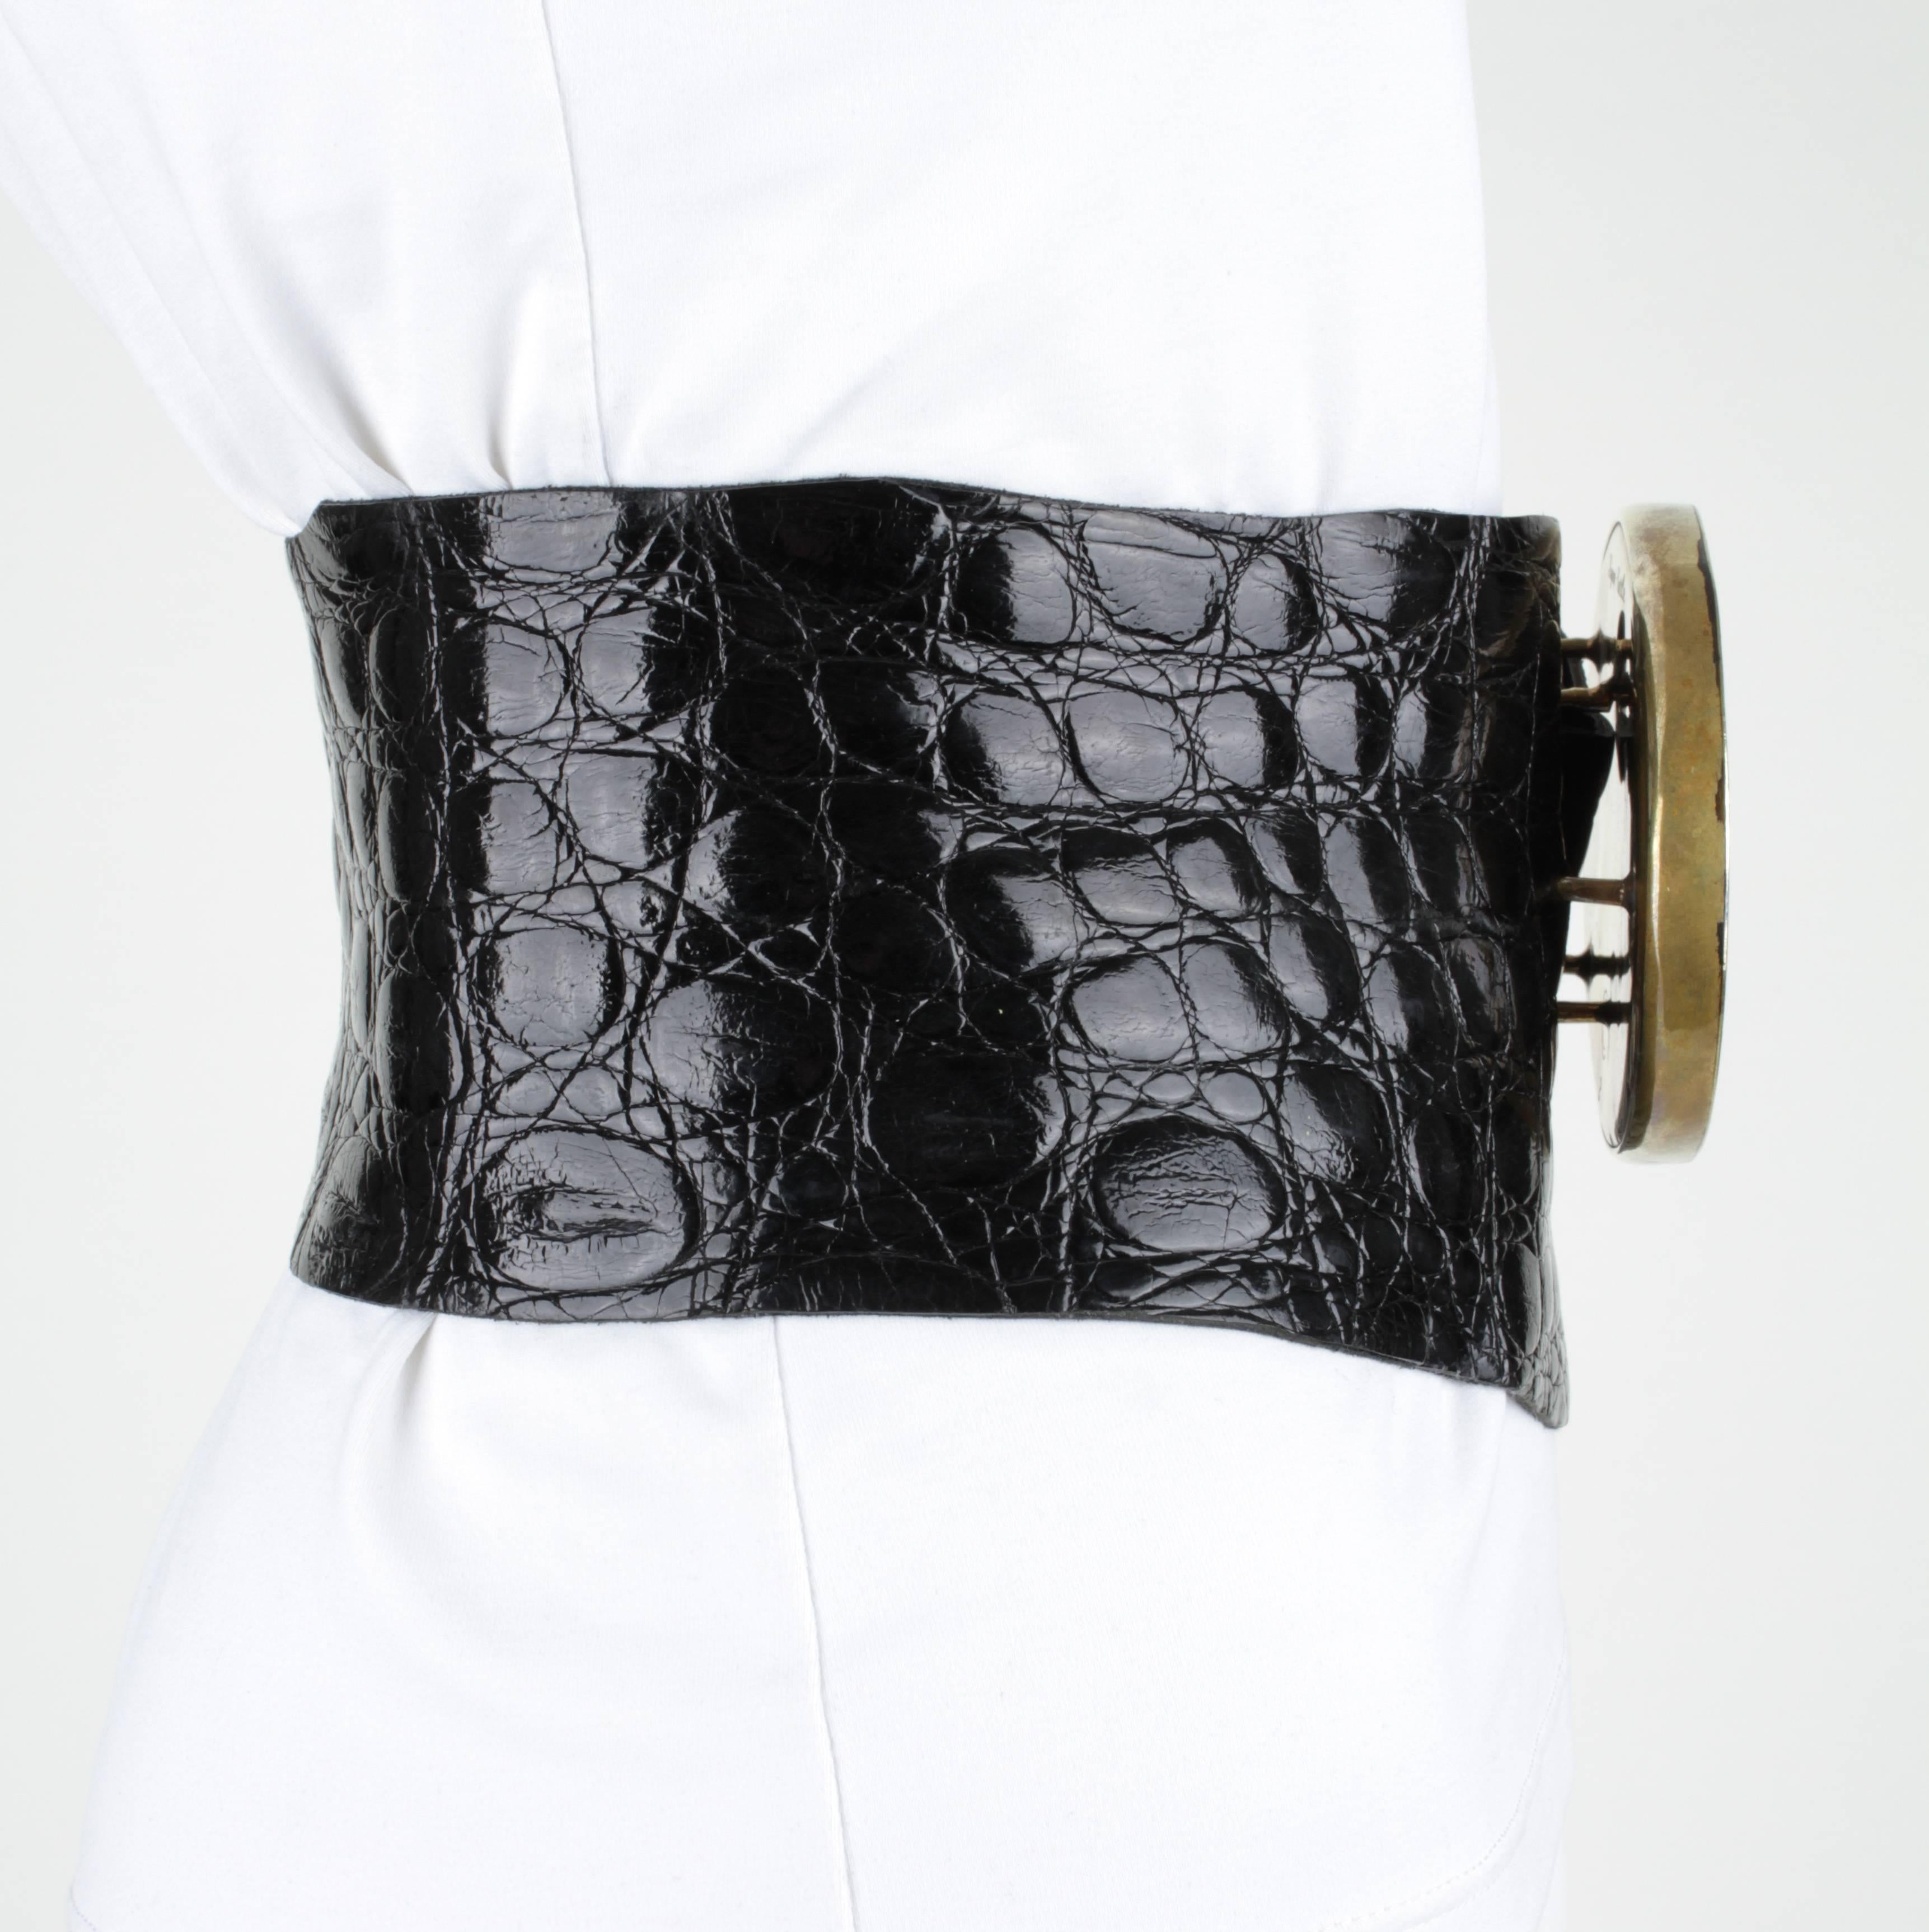 One-of-a-Kind Lynn Tuttle wide black Alligator embossed leather belt with large statement brass and stone buckle. Asymmetrical raw edge cut leather belt. Buckle detaches from leather belt by snaps. Stamped 